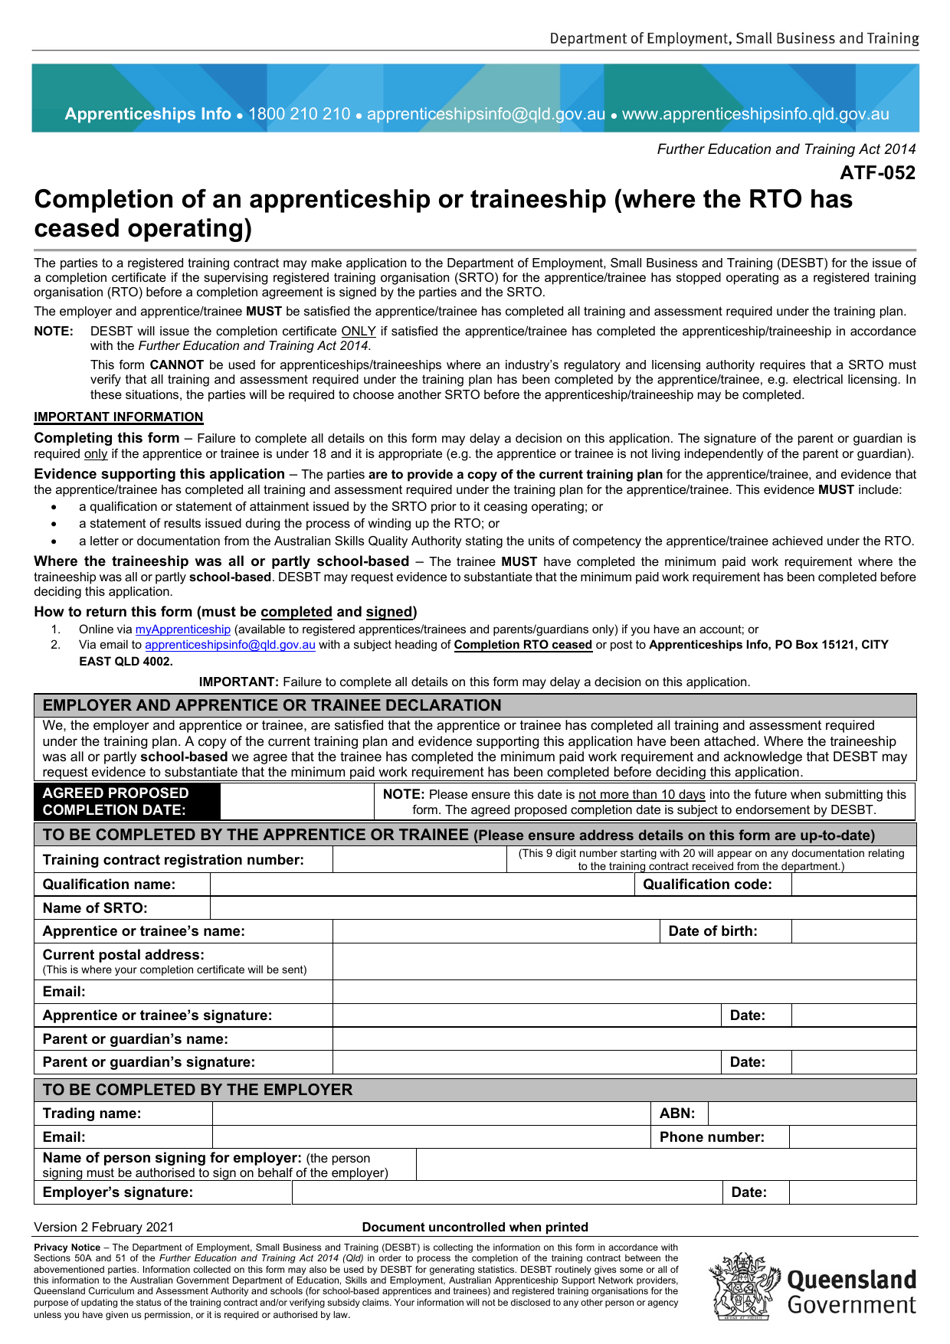 Form ATF-052 Completion of an Apprenticeship or Traineeship (Where the Rto Has Ceased Operating) - Queensland, Australia, Page 1